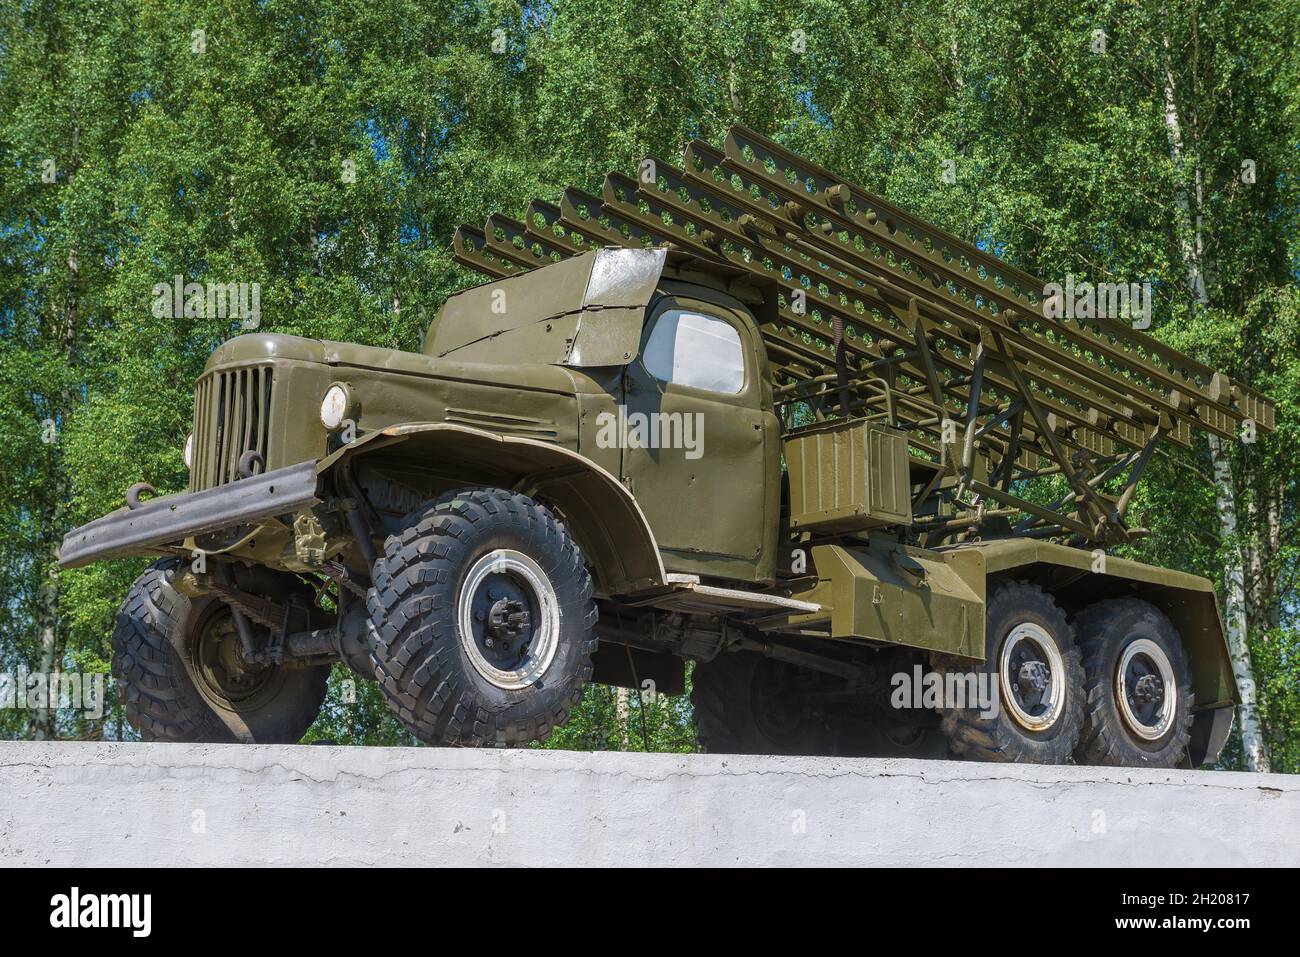 VELIZH, RUSSIA - JULY 04, 2021: BM-13NM 'Katyusha' multiple launch rocket launcher close-up on a sunny July day Stock Photo